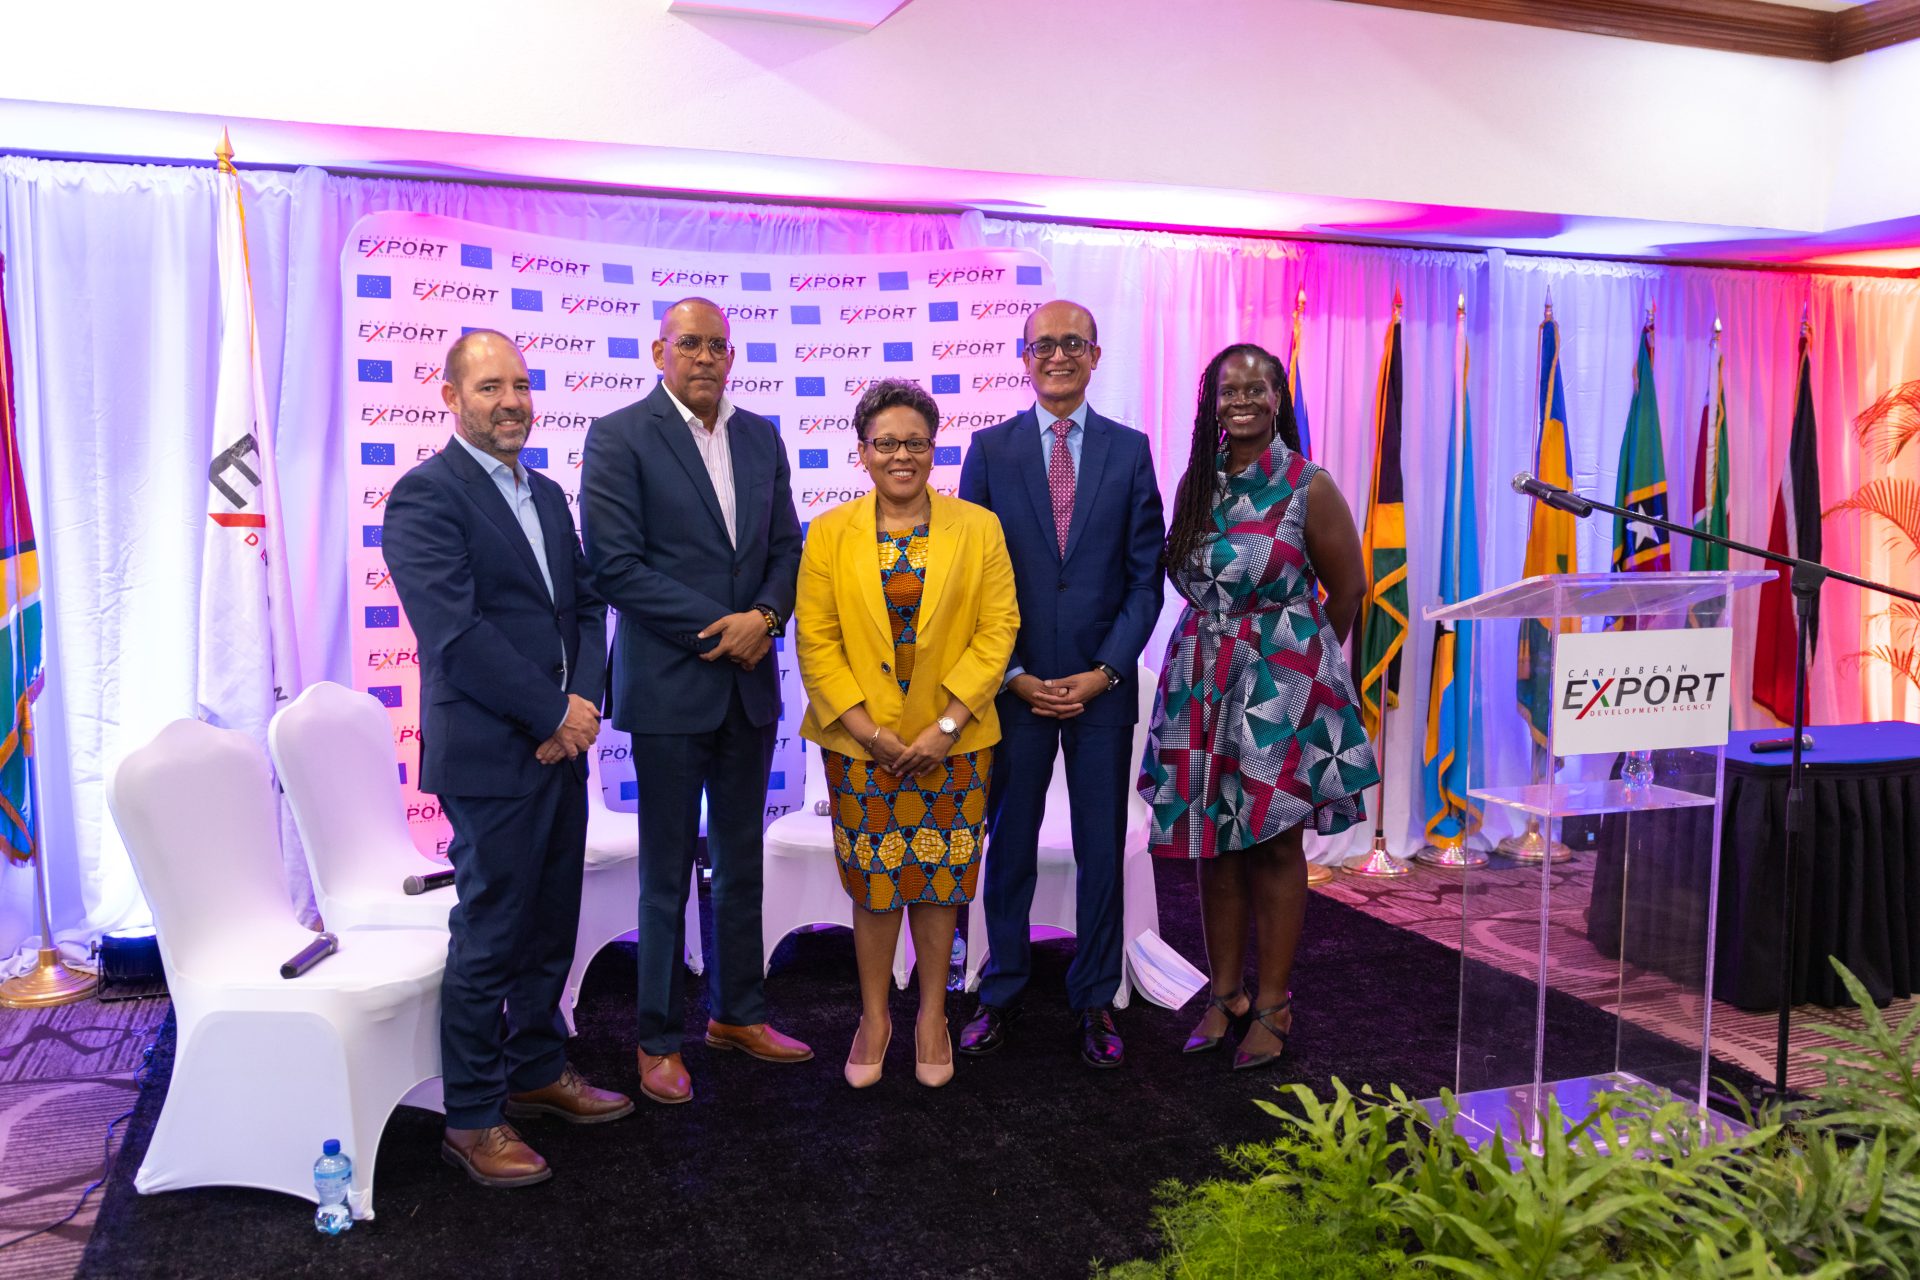 Regional private sector building resilience and readiness for the future, with grants and projects facilitated by Caribbean Export